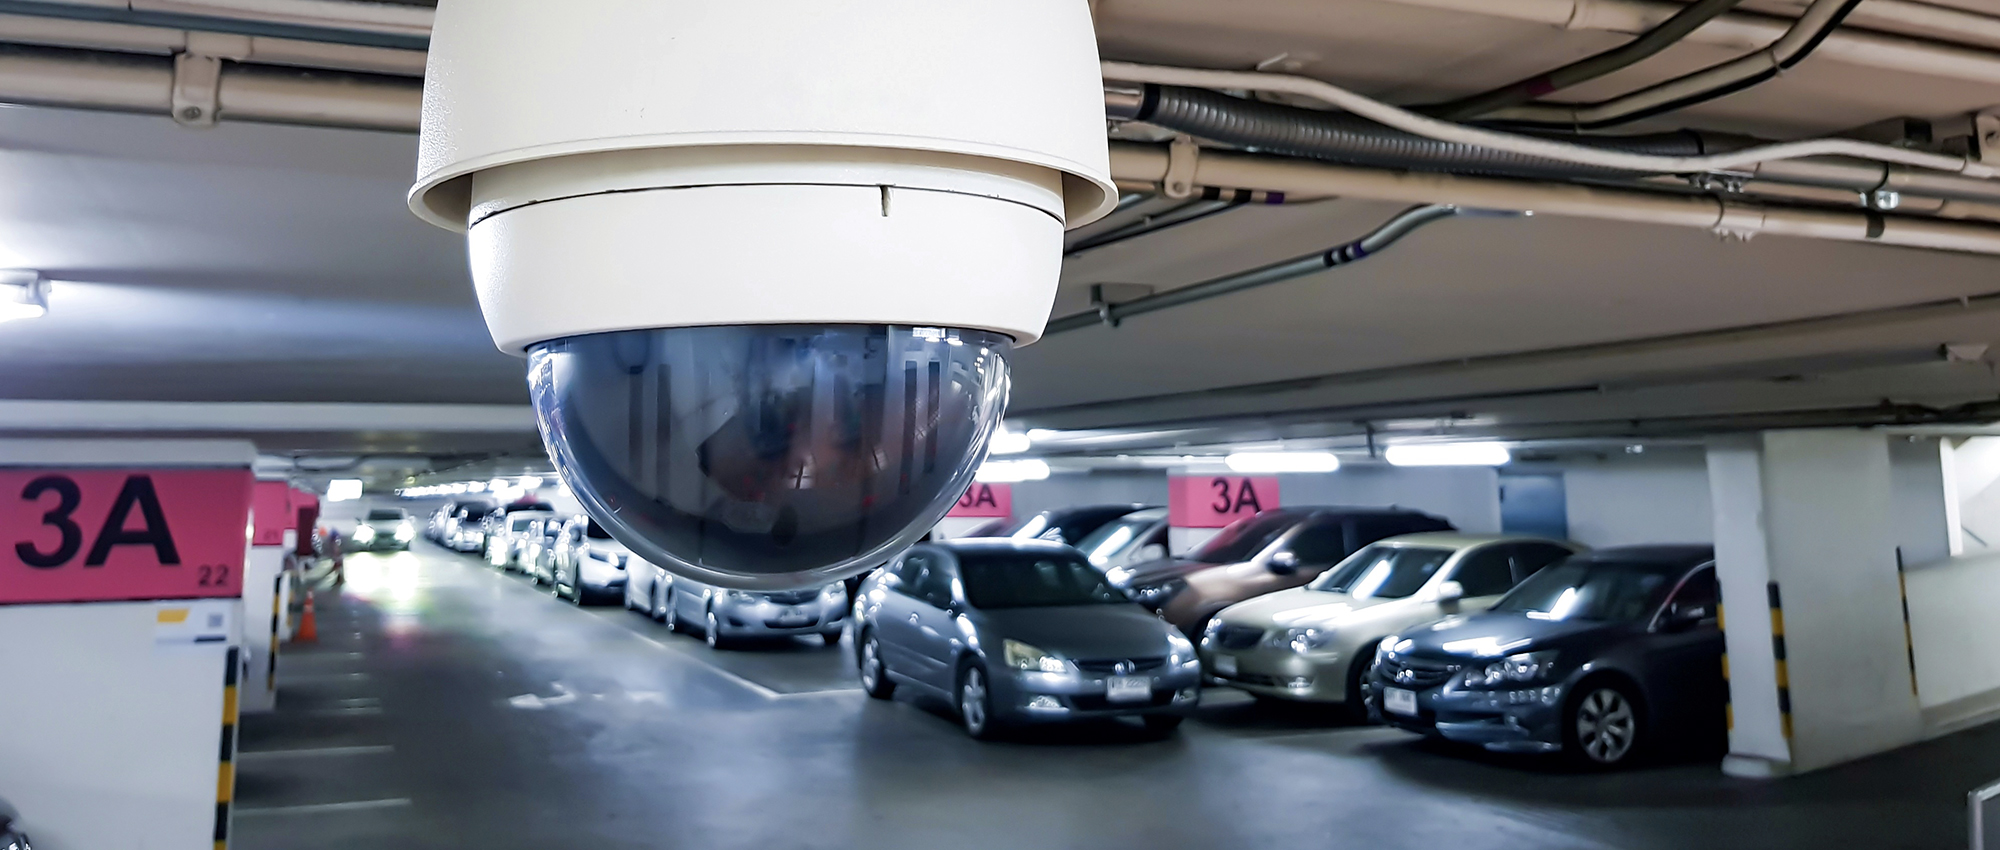 Security camera hovers underground parking lot.